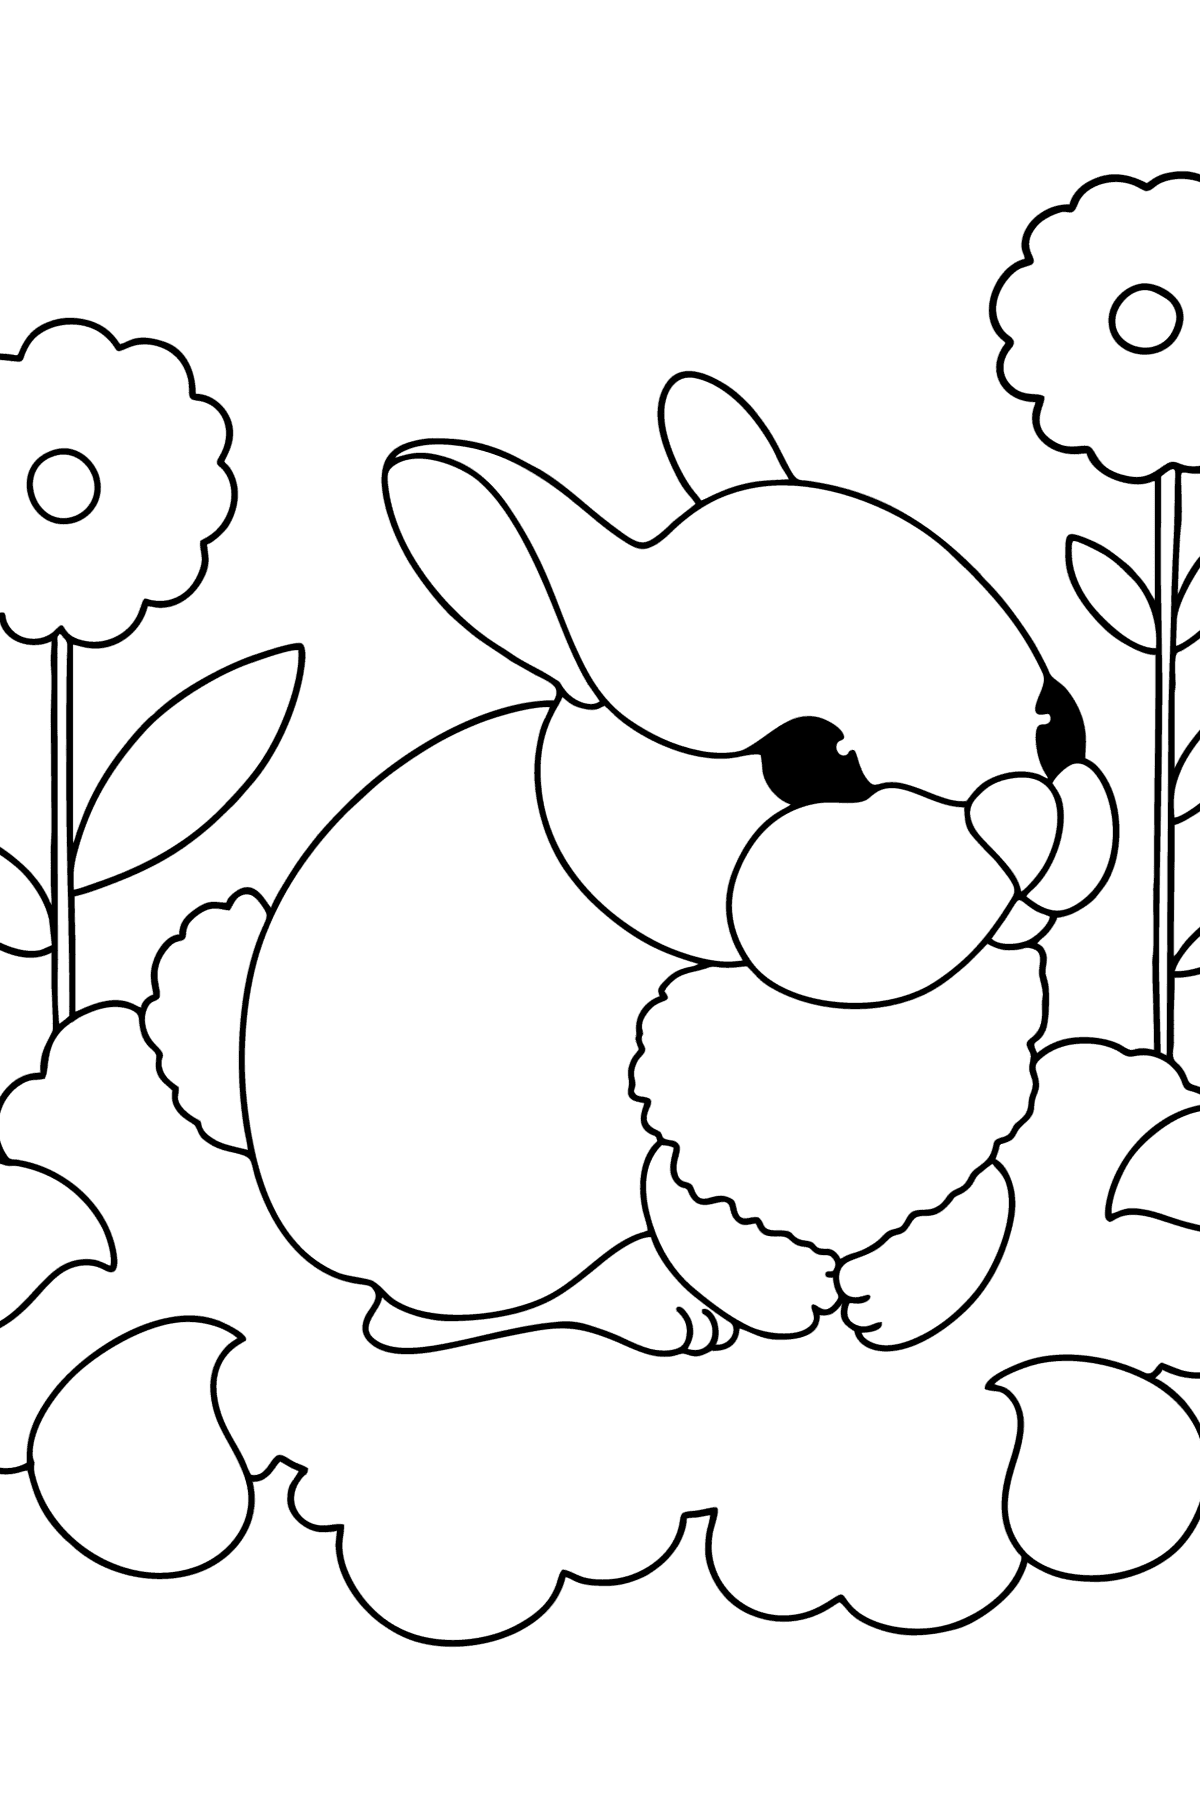 Baby Bunny Coloring page - Coloring Pages for Kids